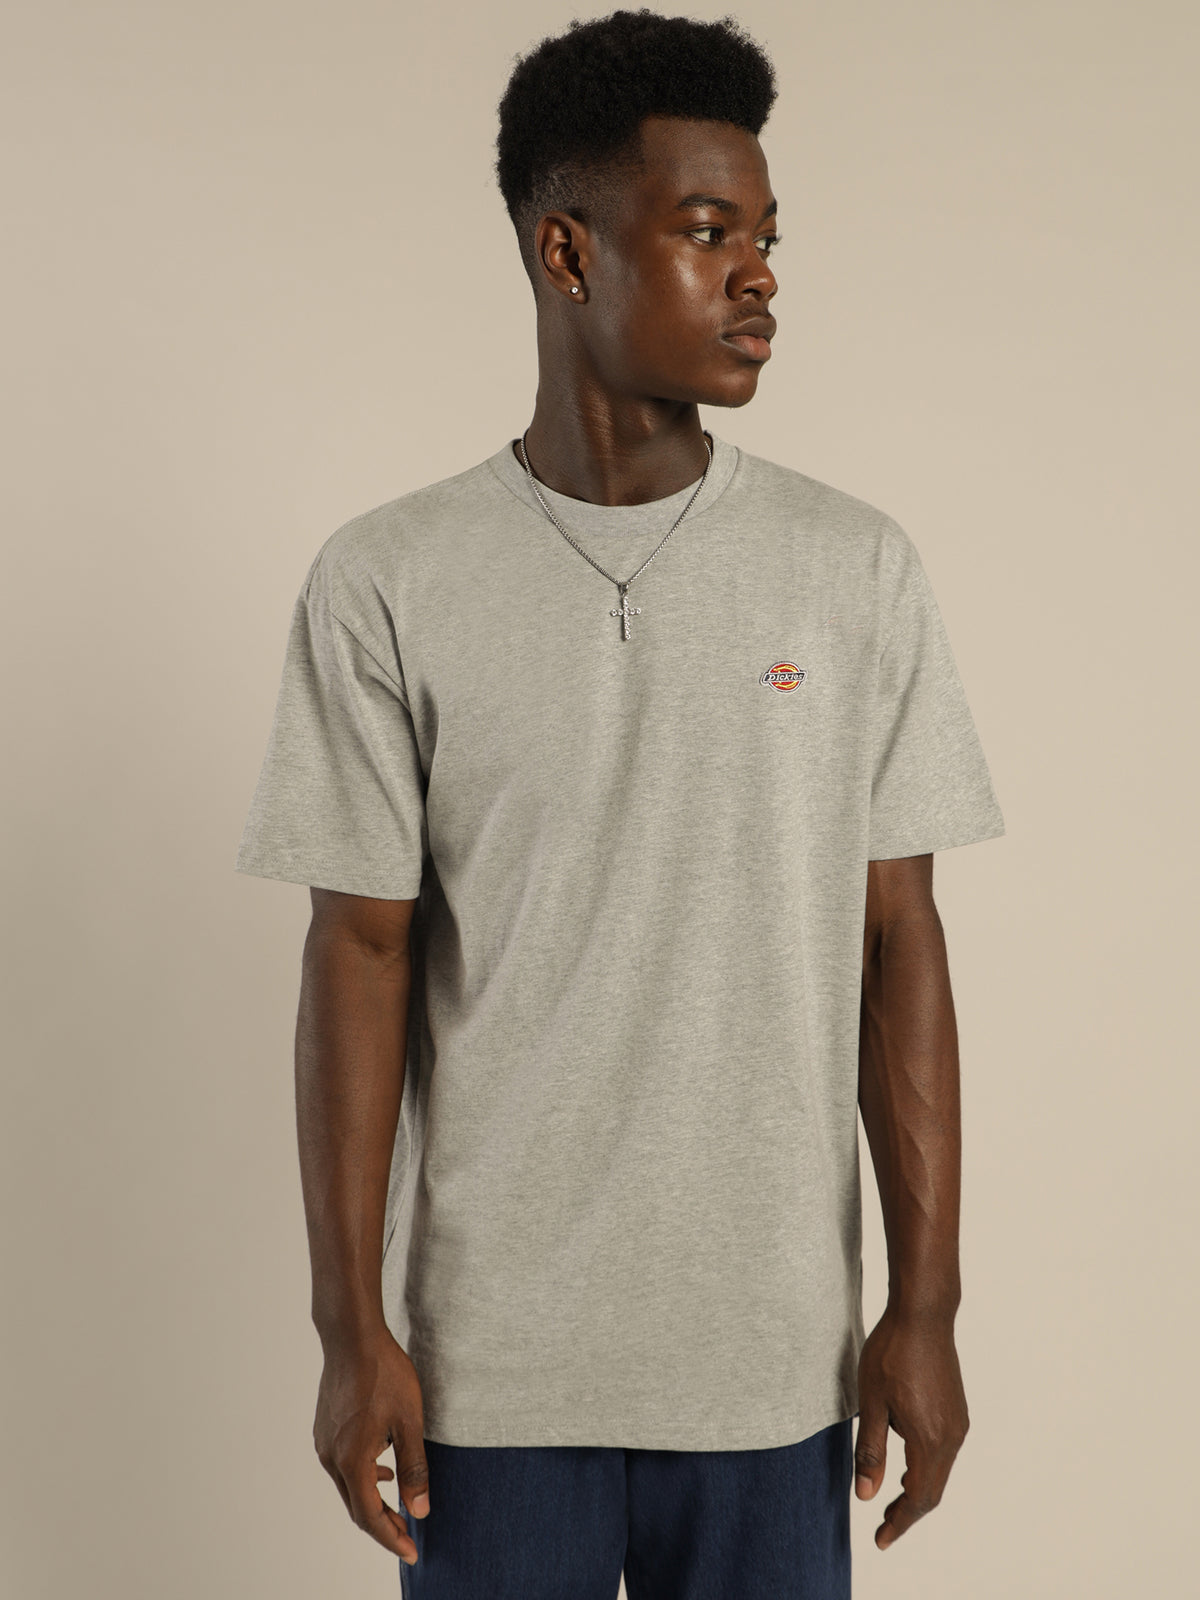 H.S Rockwood T-Shirt in Grey Marle